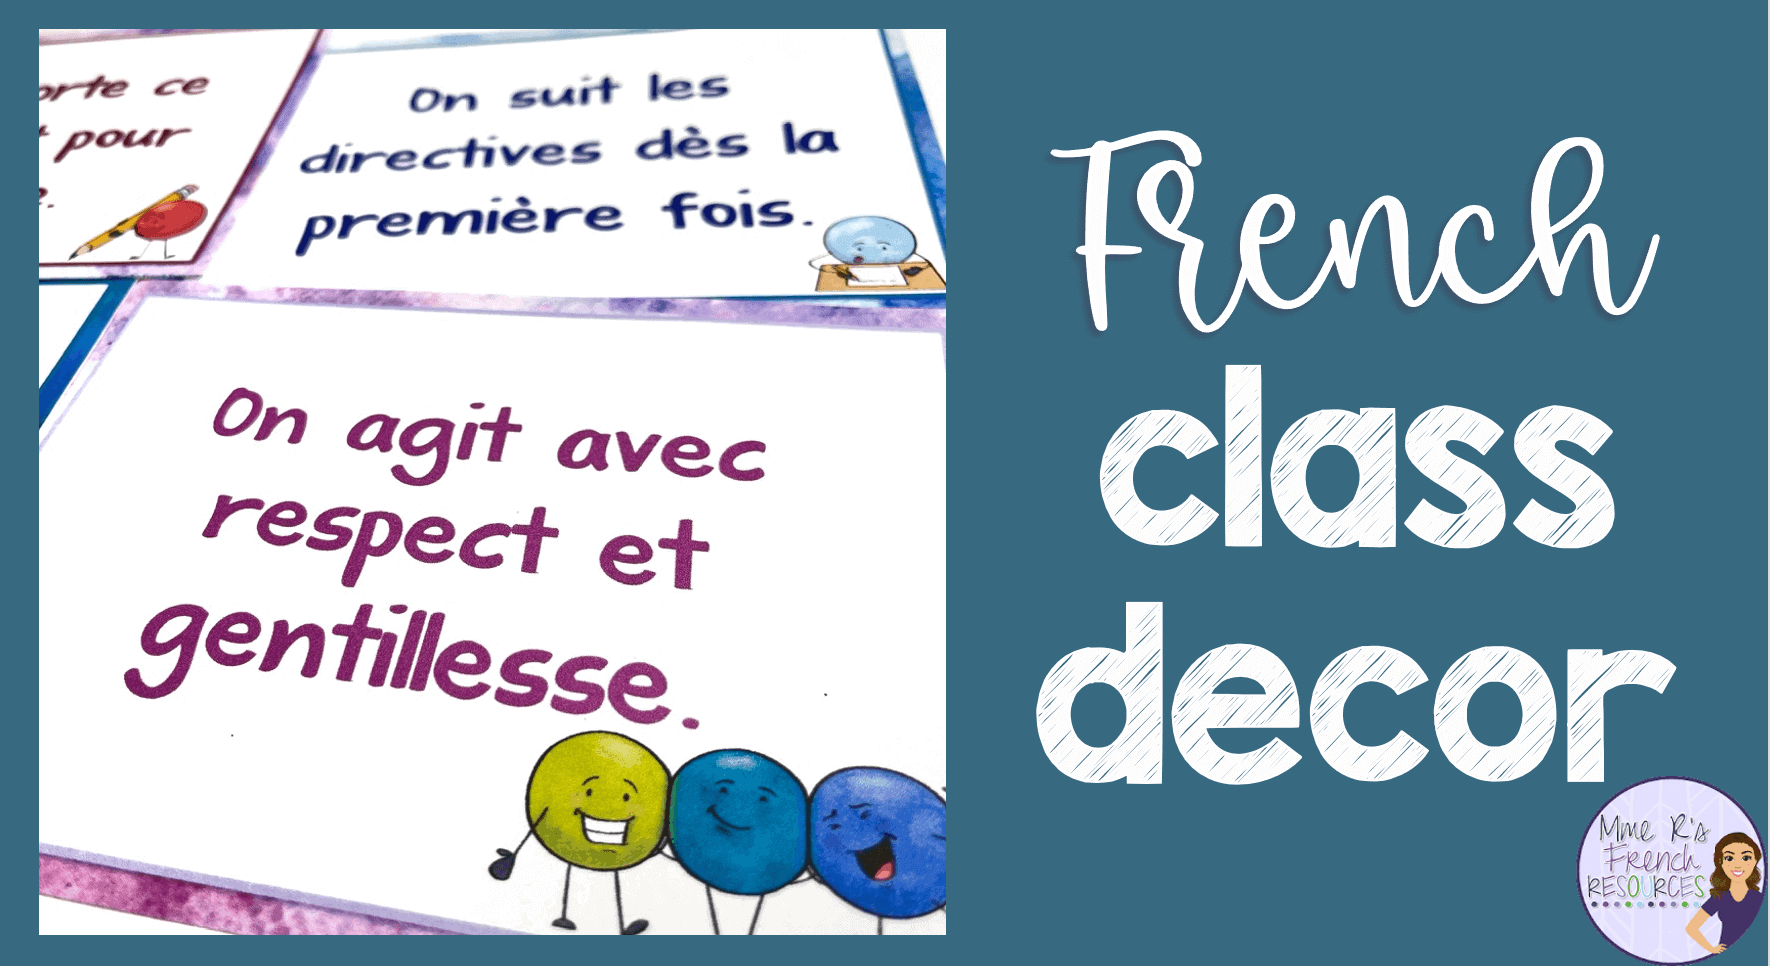 french classroom commands